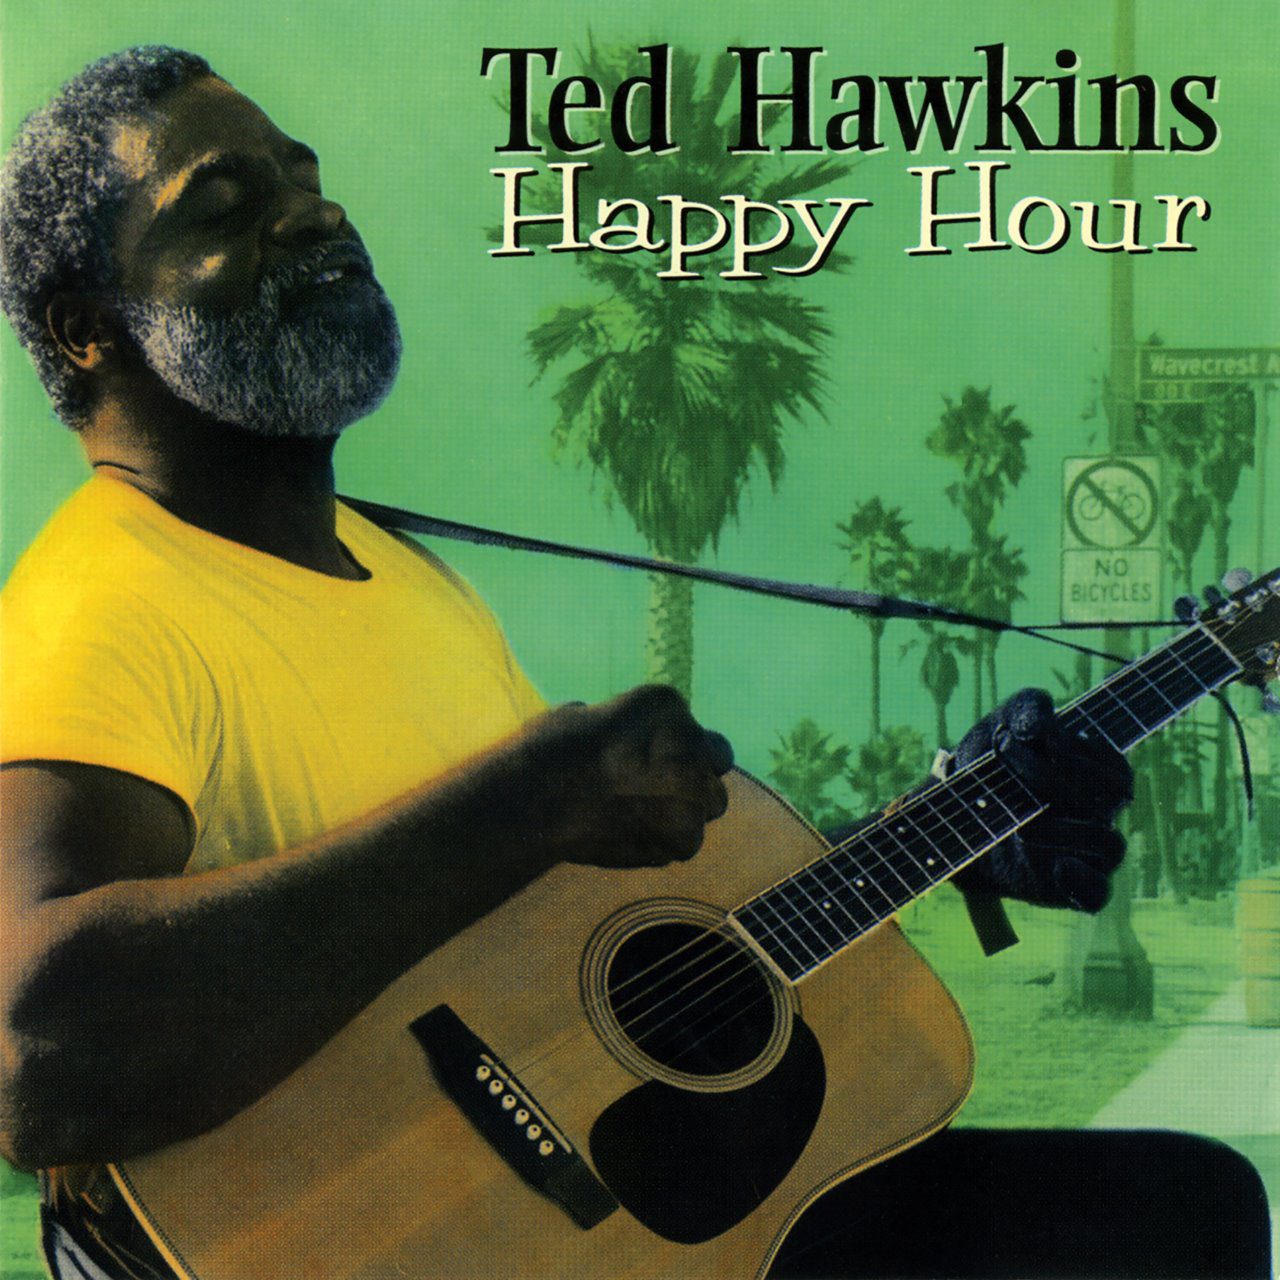 Ted Hawkins – Happy Hour cover album